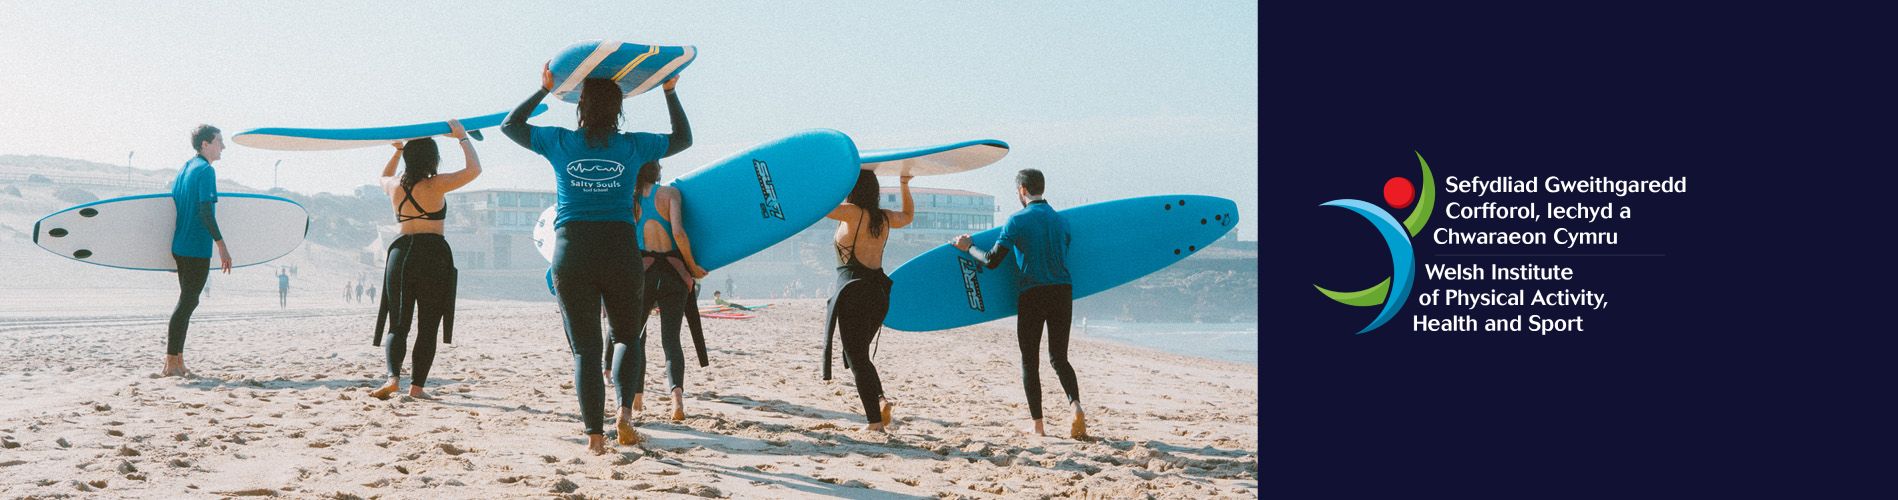 A group of friends make their way to the beach carrying surfboards on their heads